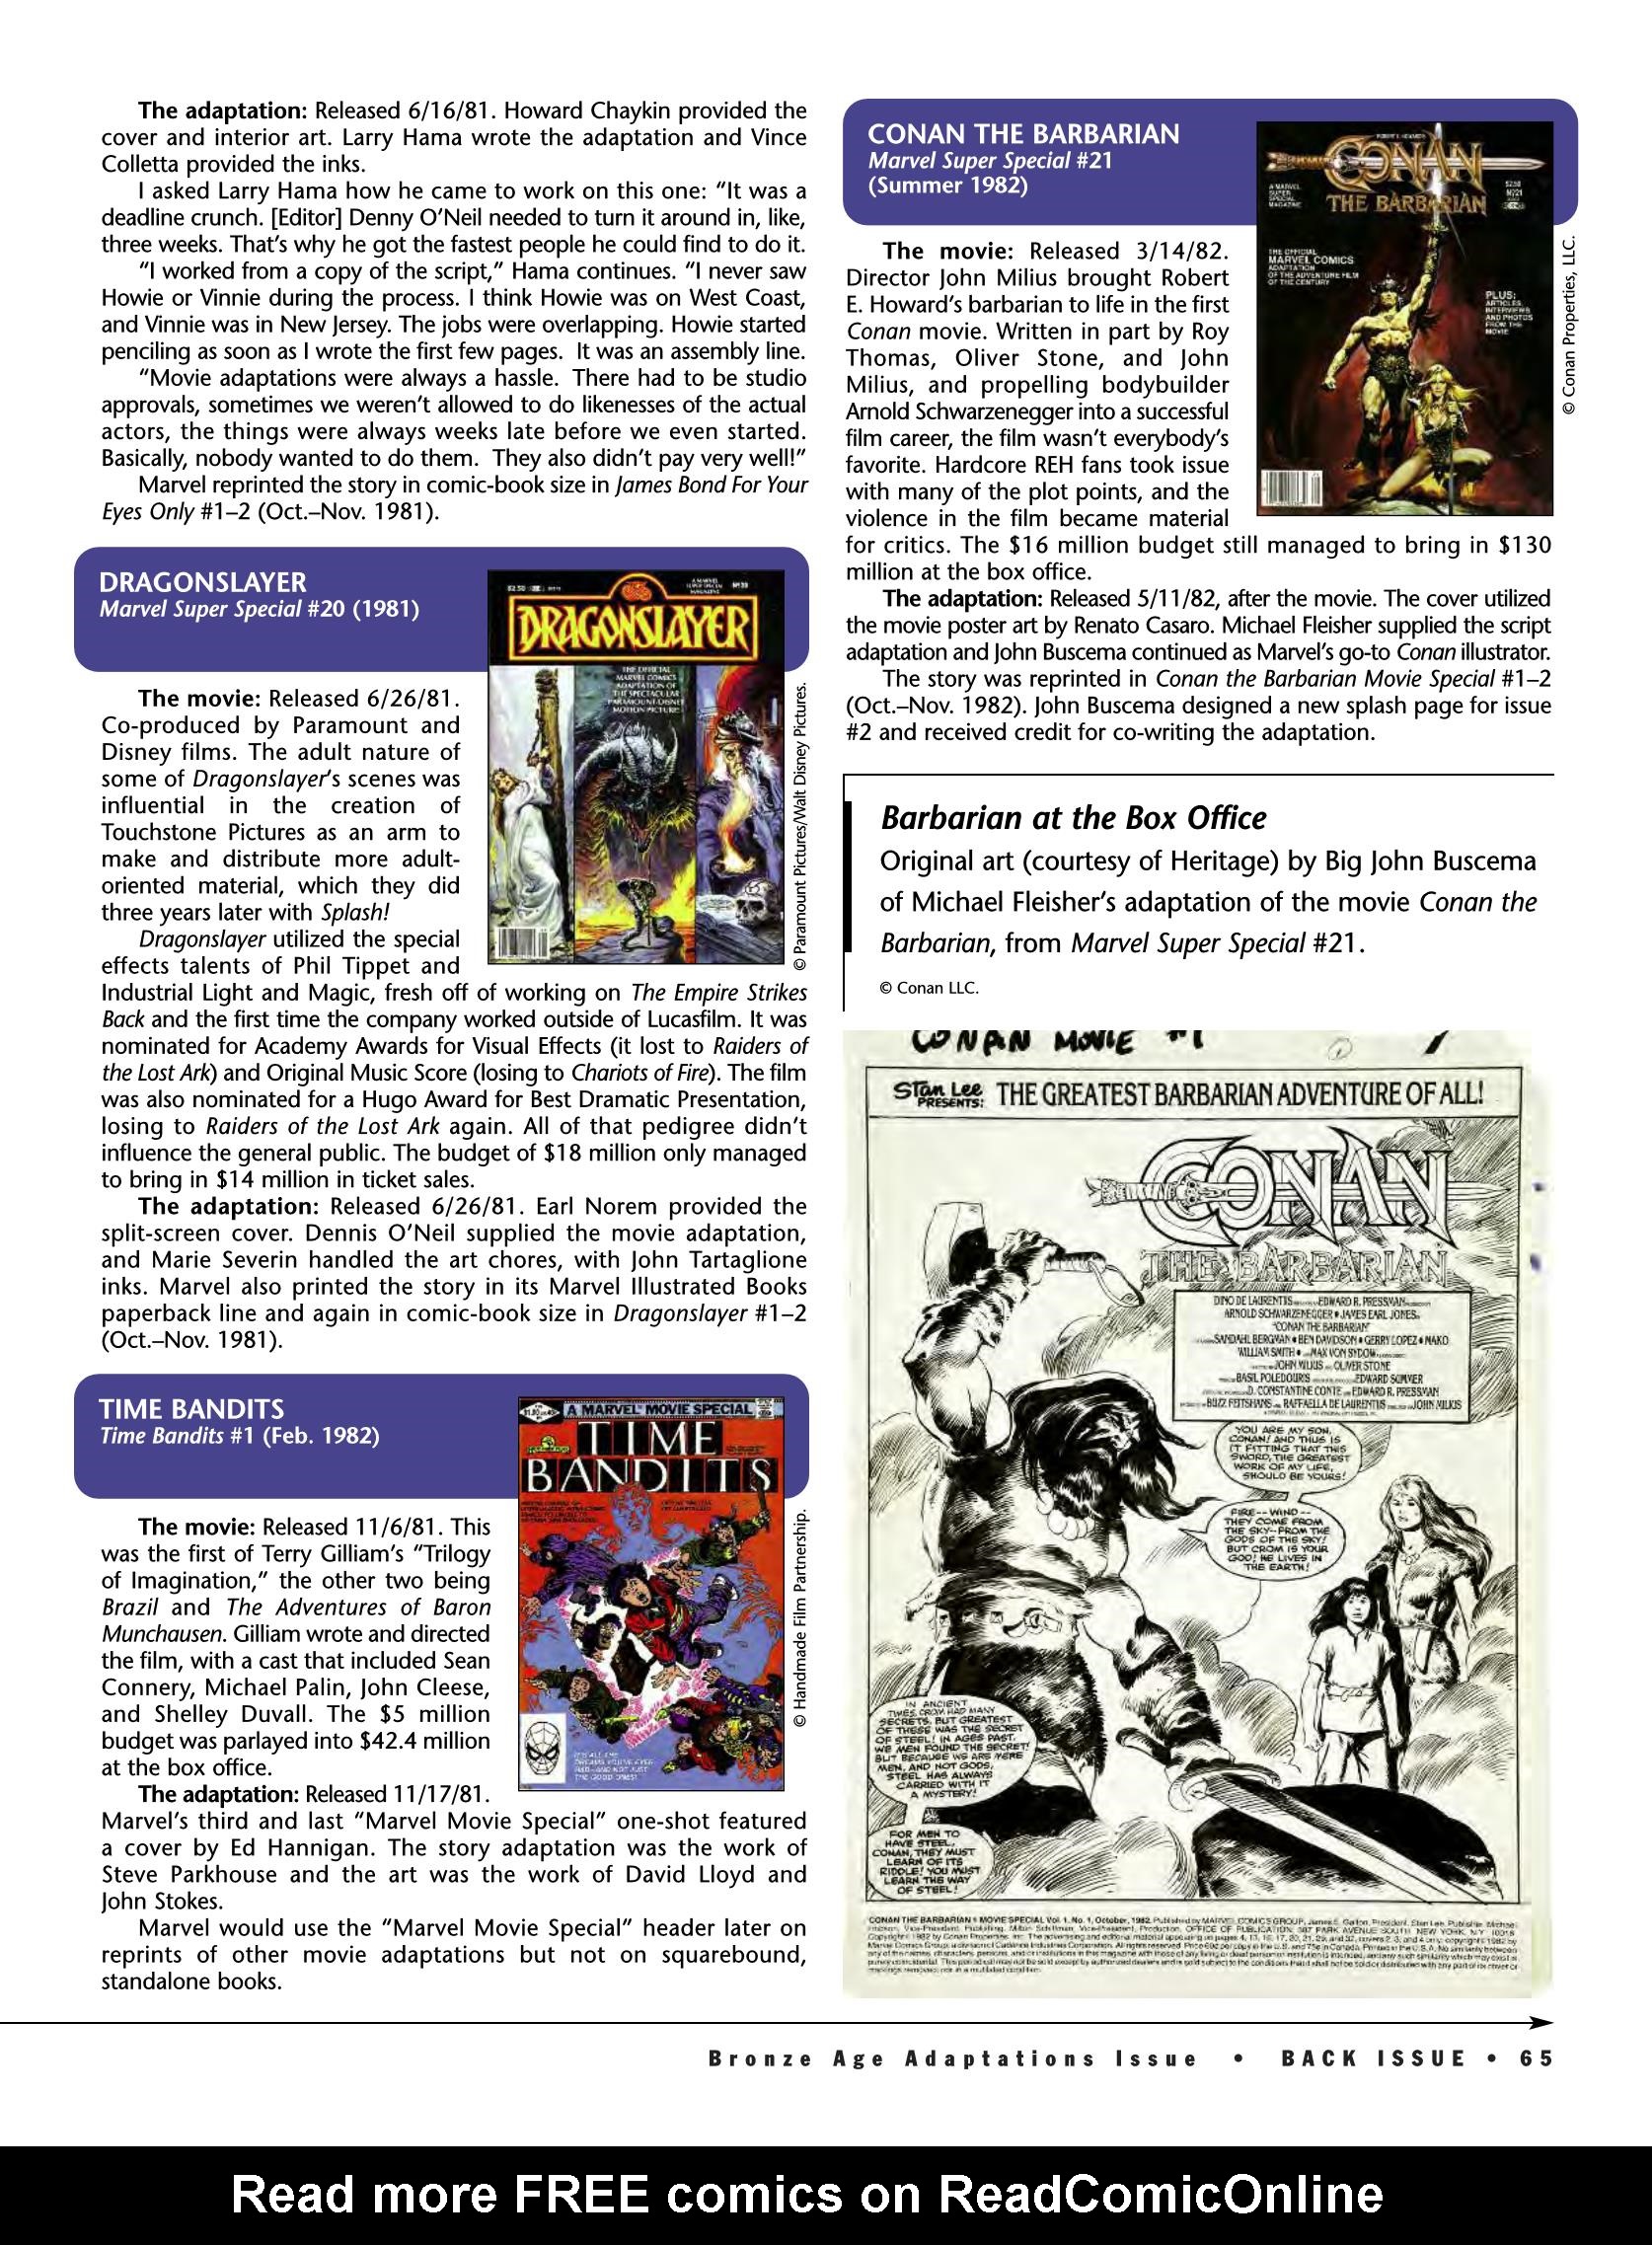 Read online Back Issue comic -  Issue #89 - 64